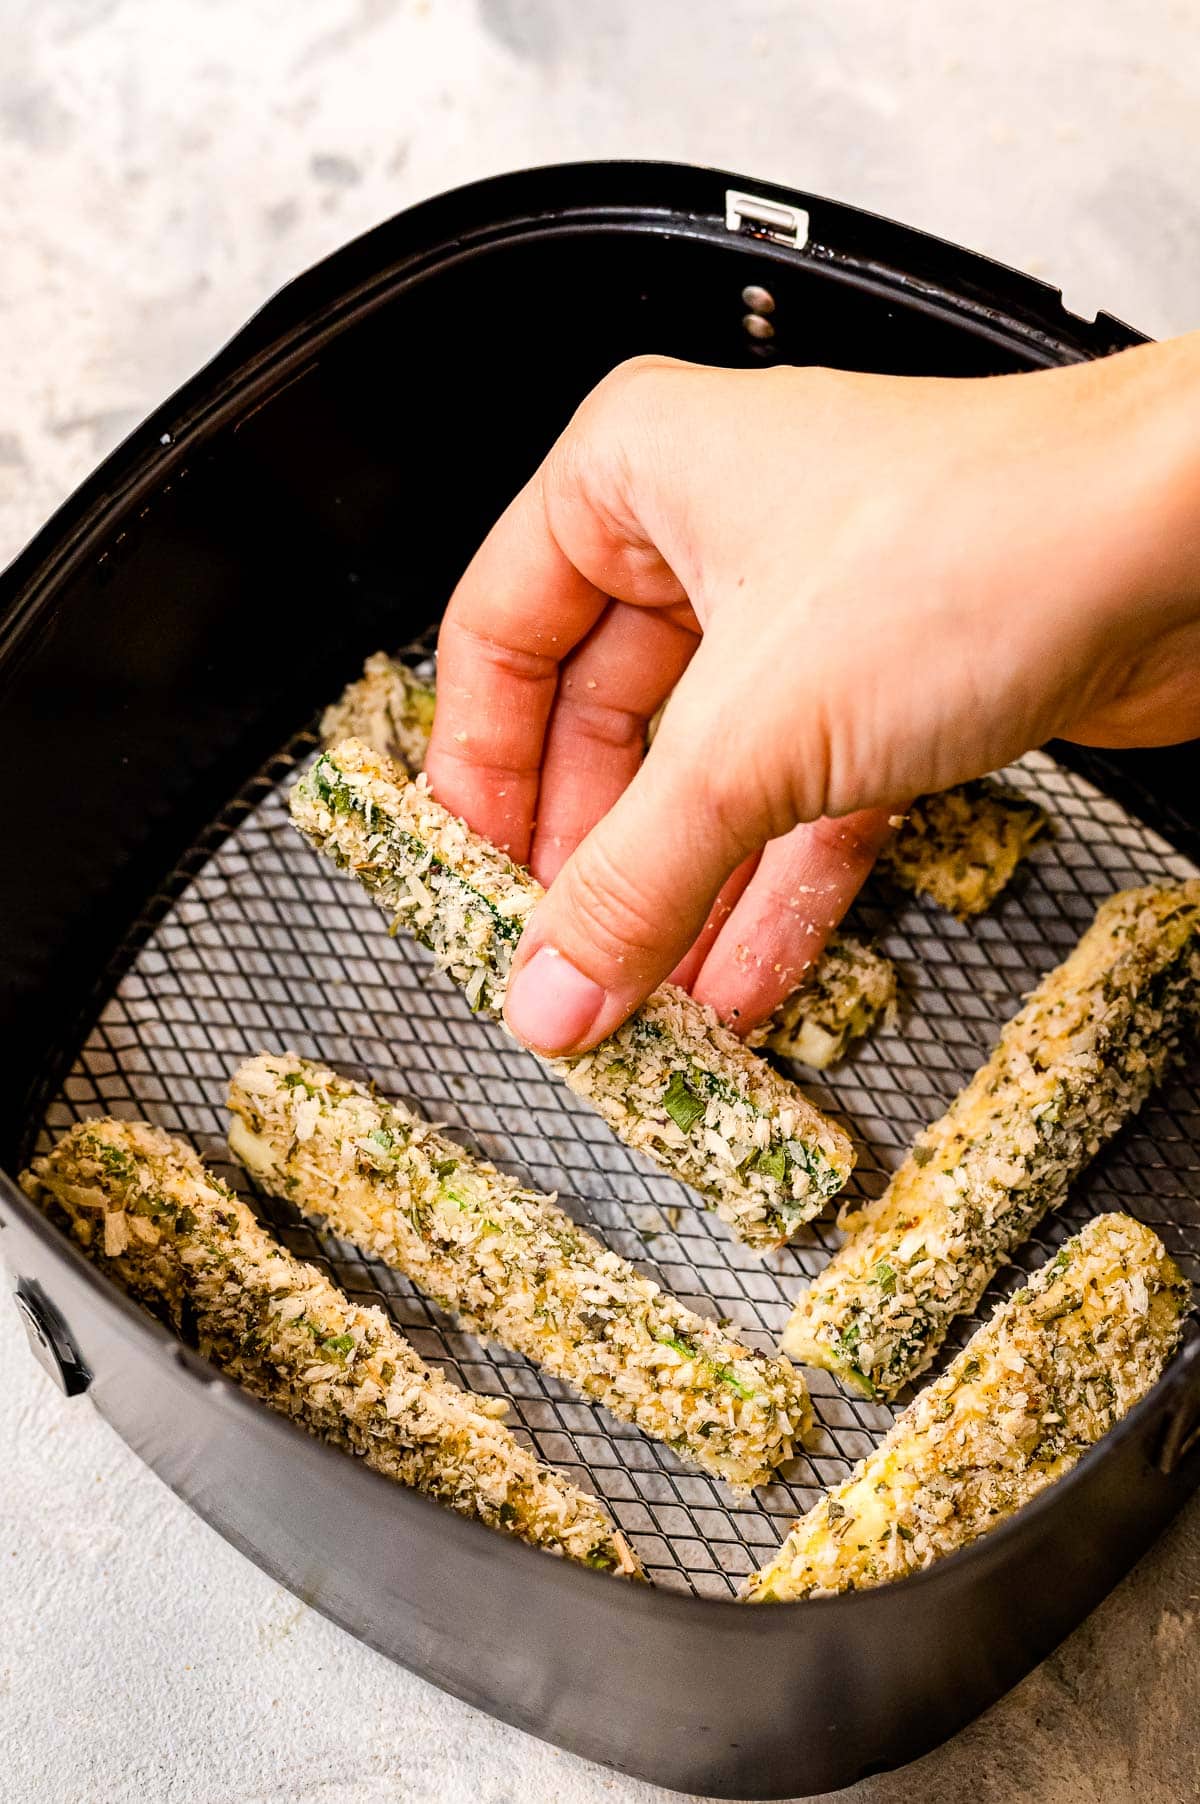 Hand placing a zucchini fry in air fryer basket